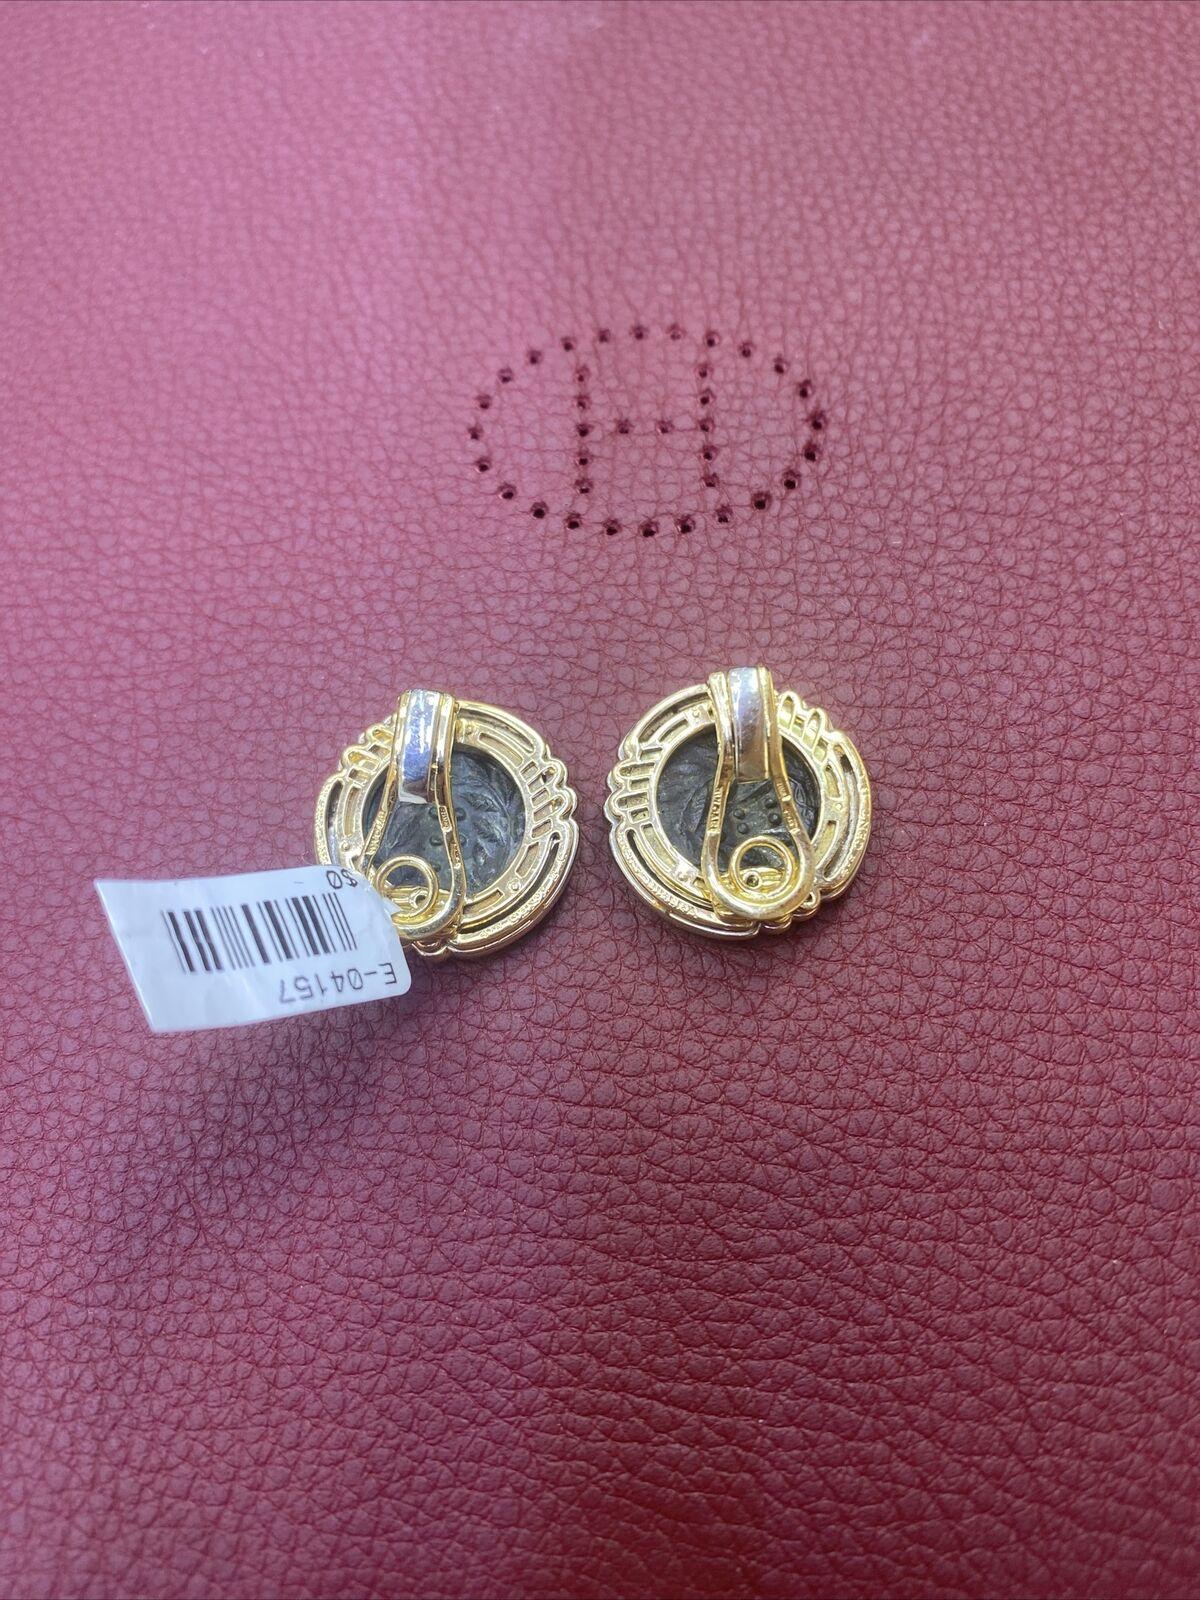 Bvlgari Two Tone 18k Gold Ancient Roman Coin Earrings In Excellent Condition For Sale In New York, NY